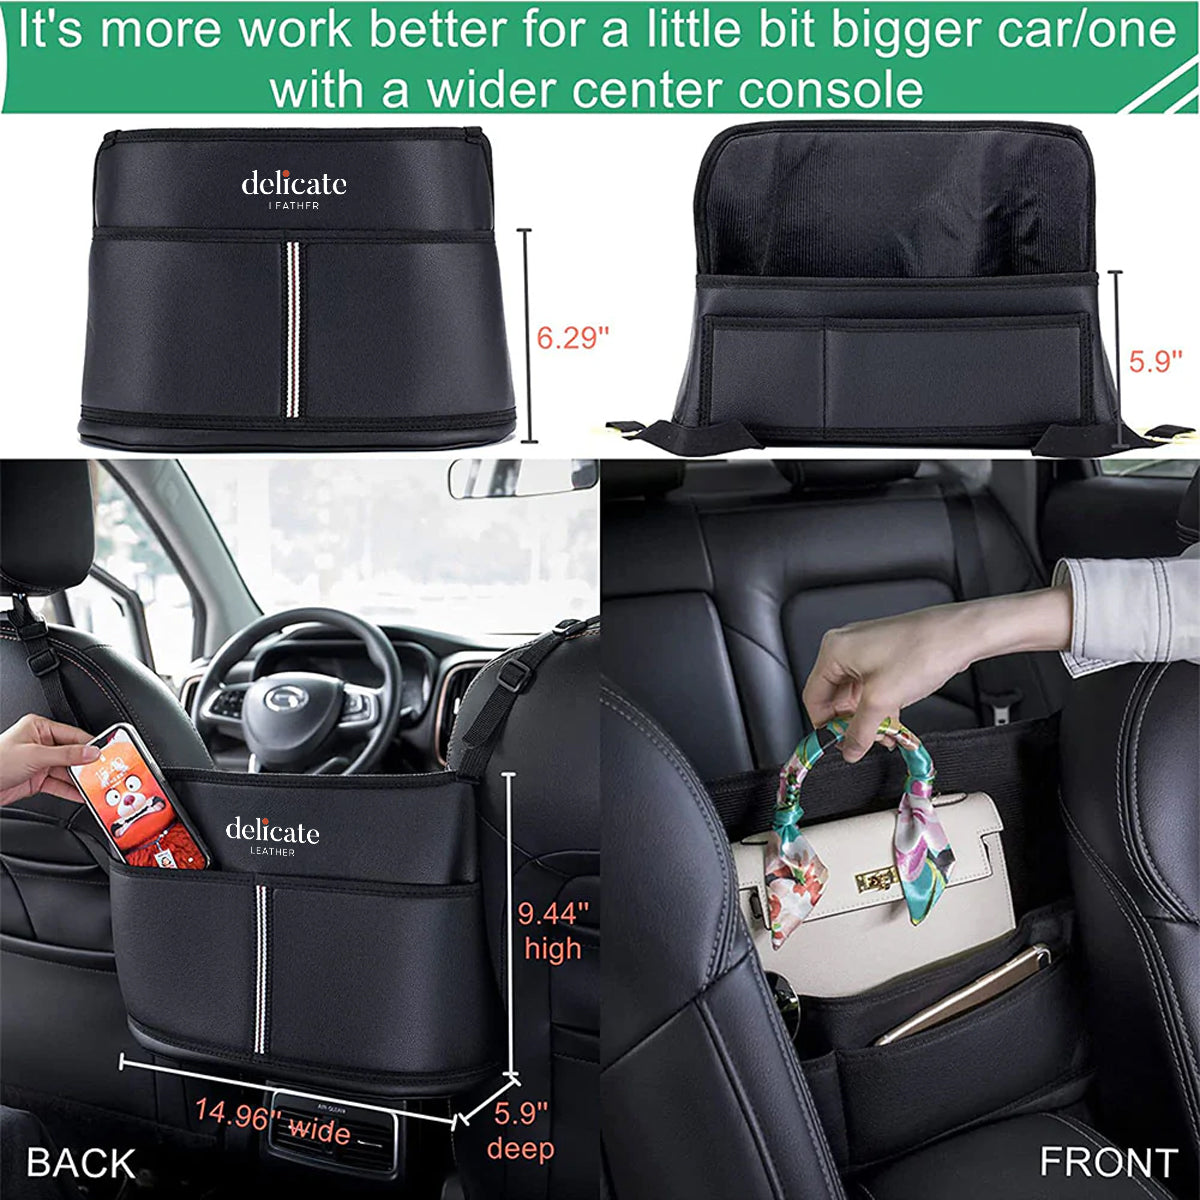 Car Purse Holder for Car Handbag Holder Between Seats Premium PU Leather, Custom Fit For Your Cars, Auto Driver Or Passenger Accessories Organizer, Hanging Car Purse Storage Pocket Back Seat Pet Barrier MT11991 - Delicate Leather